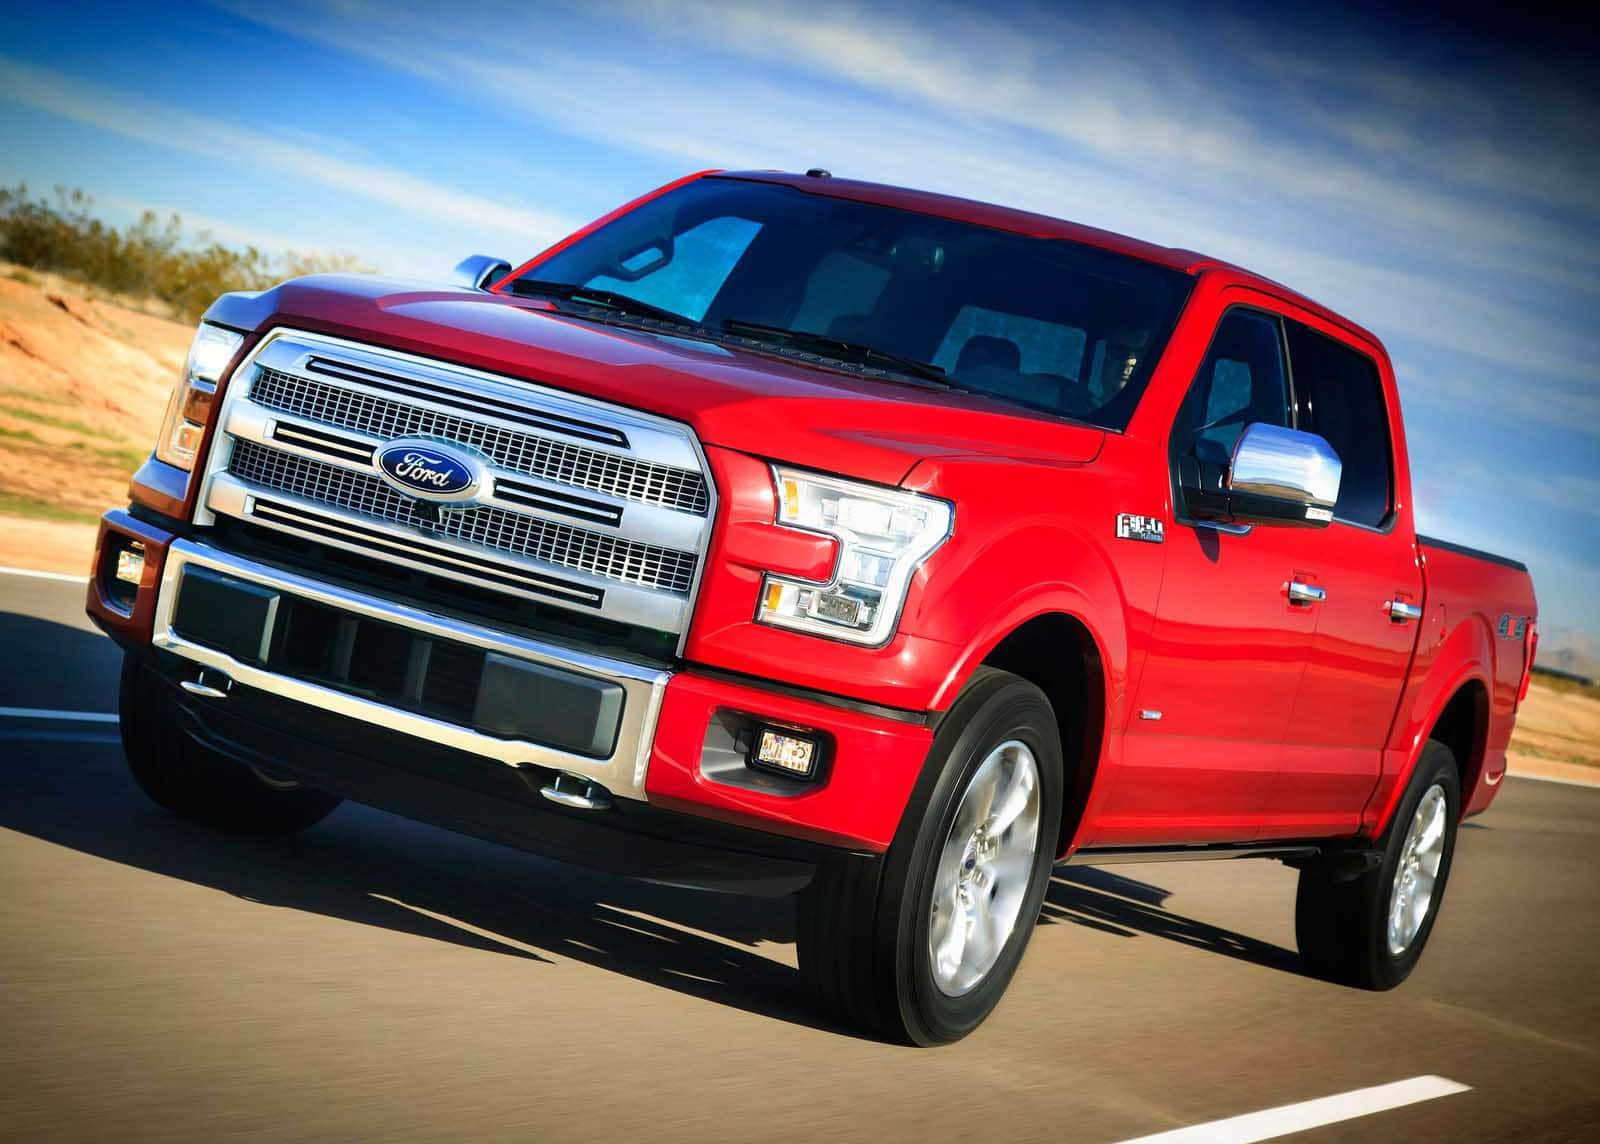 Ford Truck: Ready To Take On Any Terrain